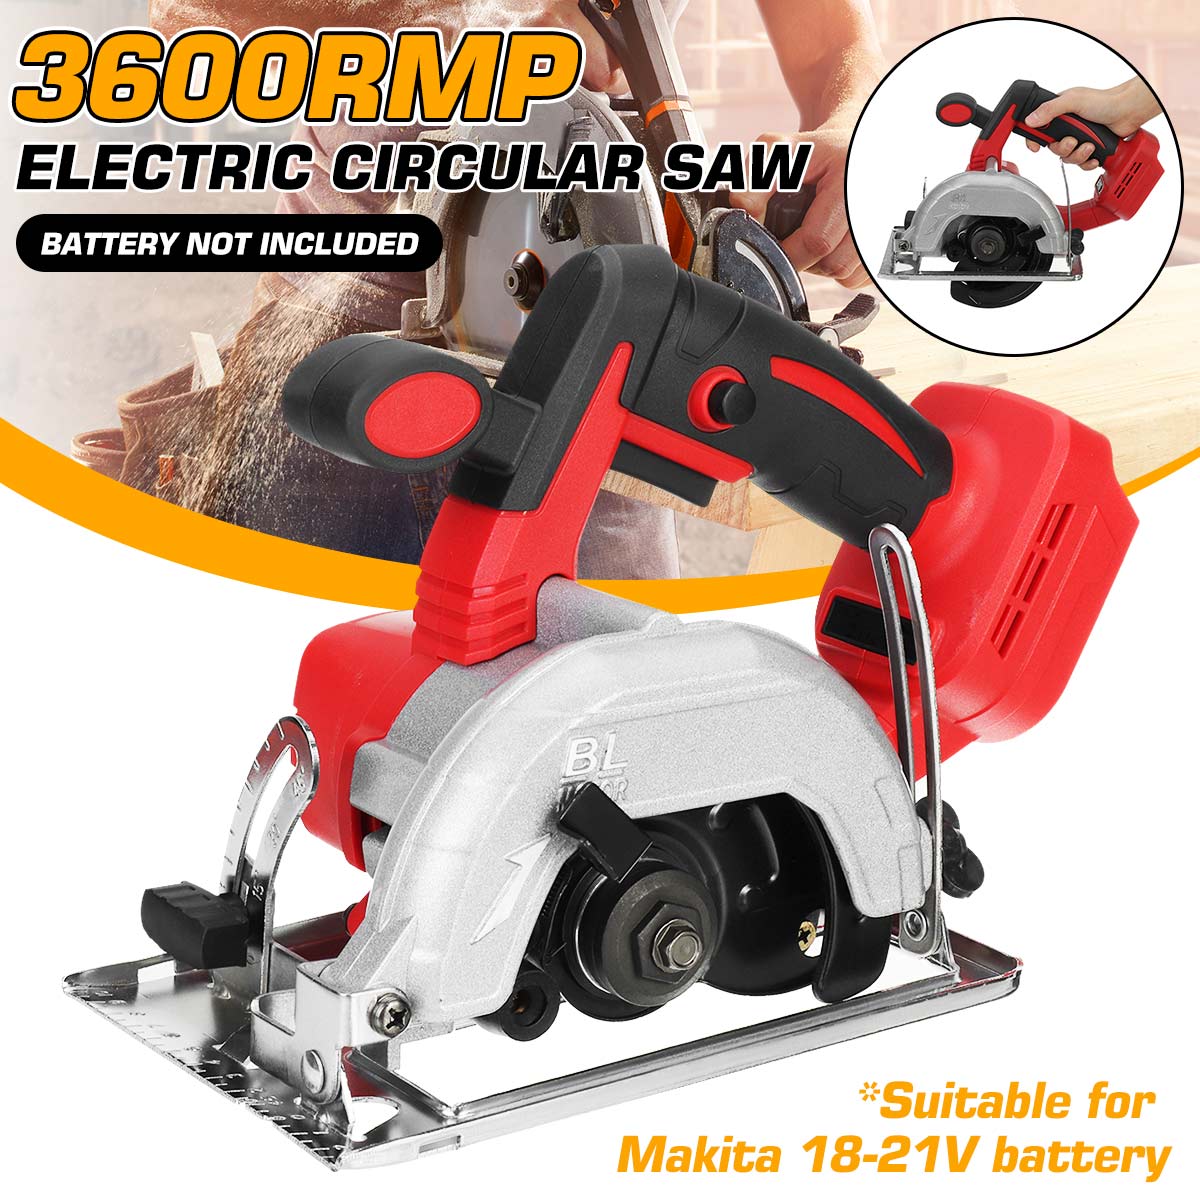 10800RPM-5inch-Red-Electric-Circular-Saw-Tool-Cutting-Machine-For-Makita-18-21V-Battery-1803012-1